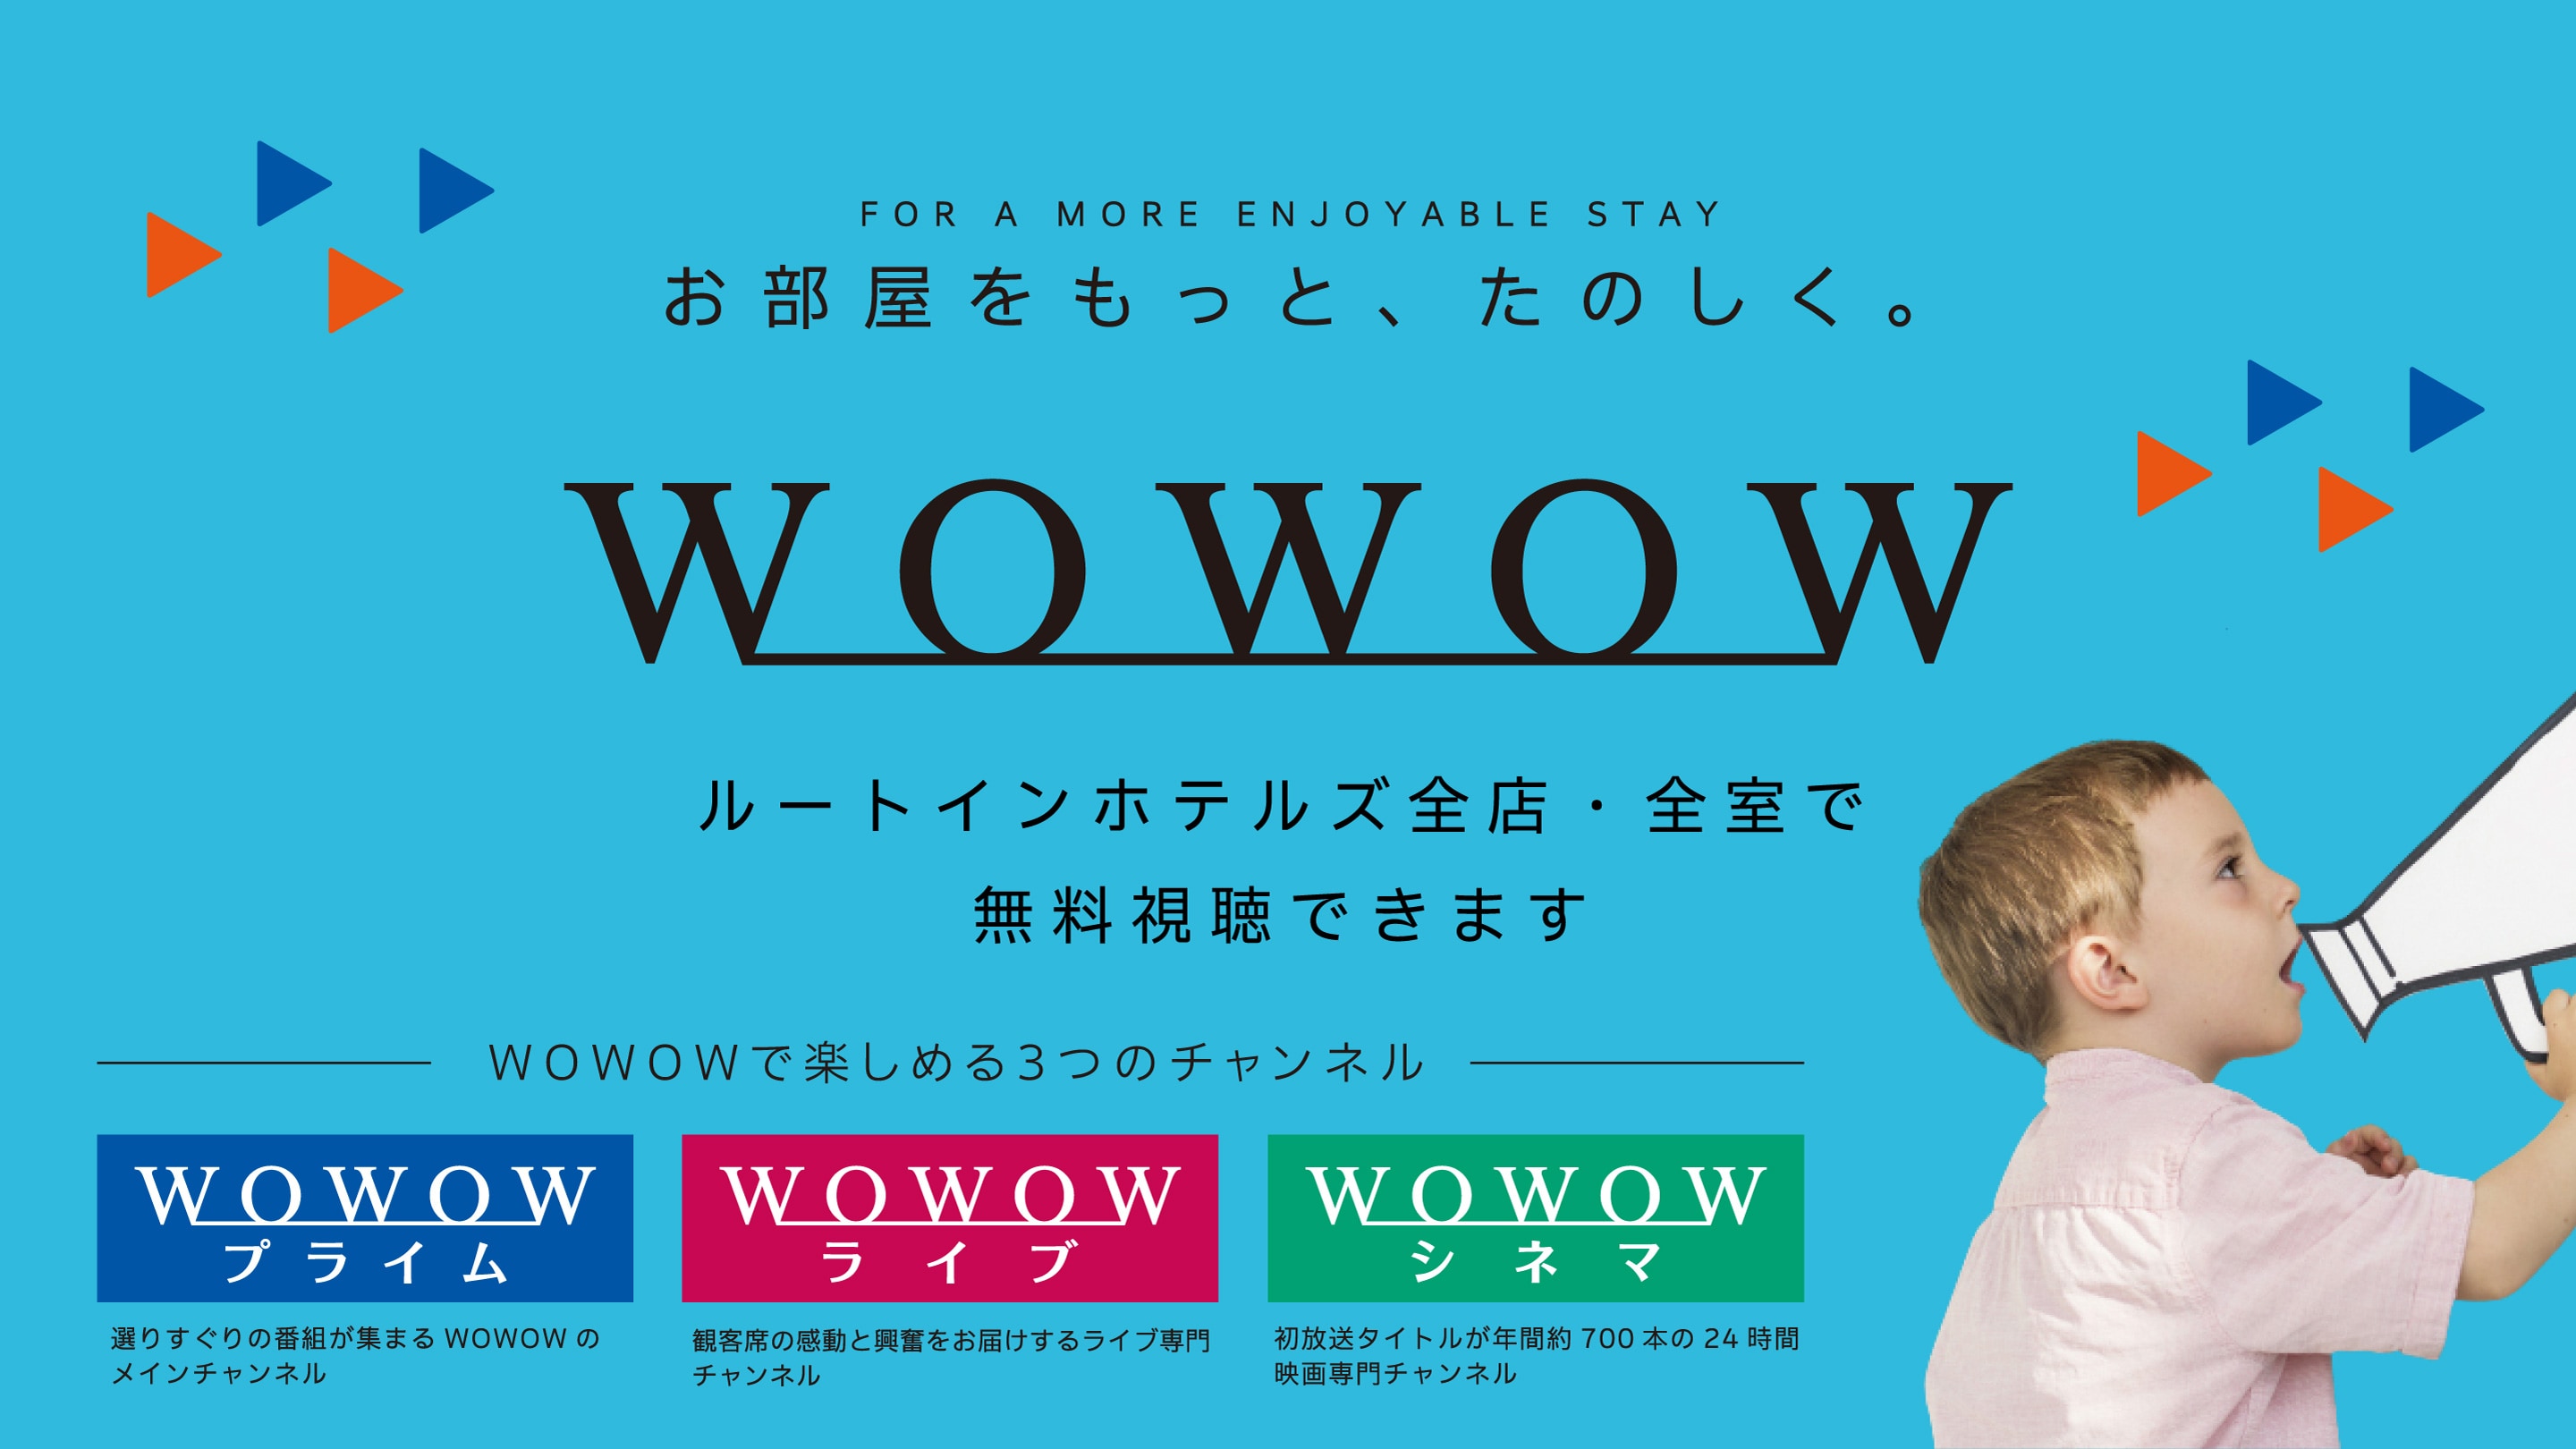 You can watch WOWOW for free in all rooms